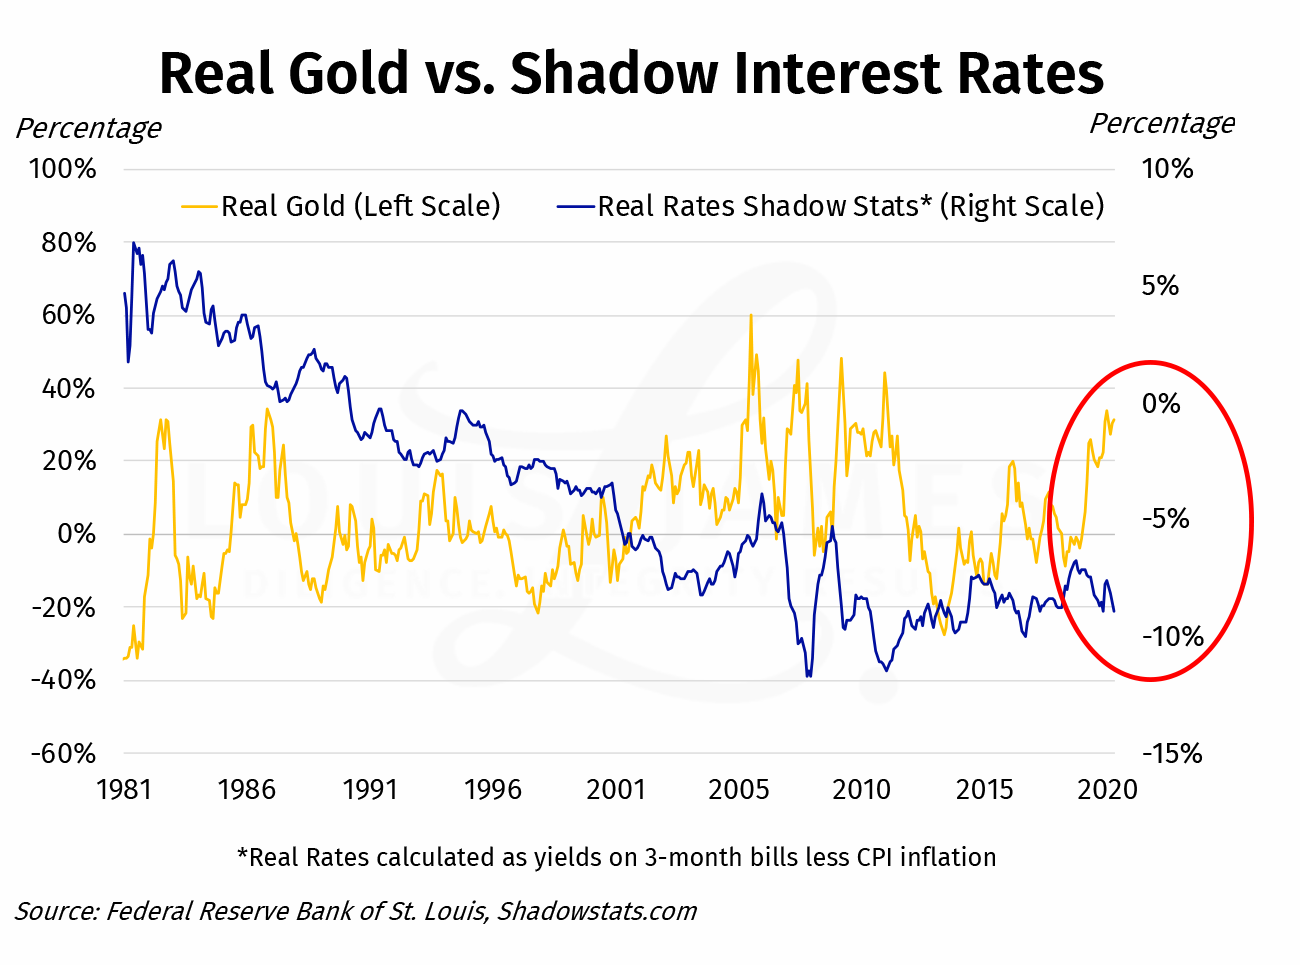 Real Gold vs Real Interest Rates Shadow